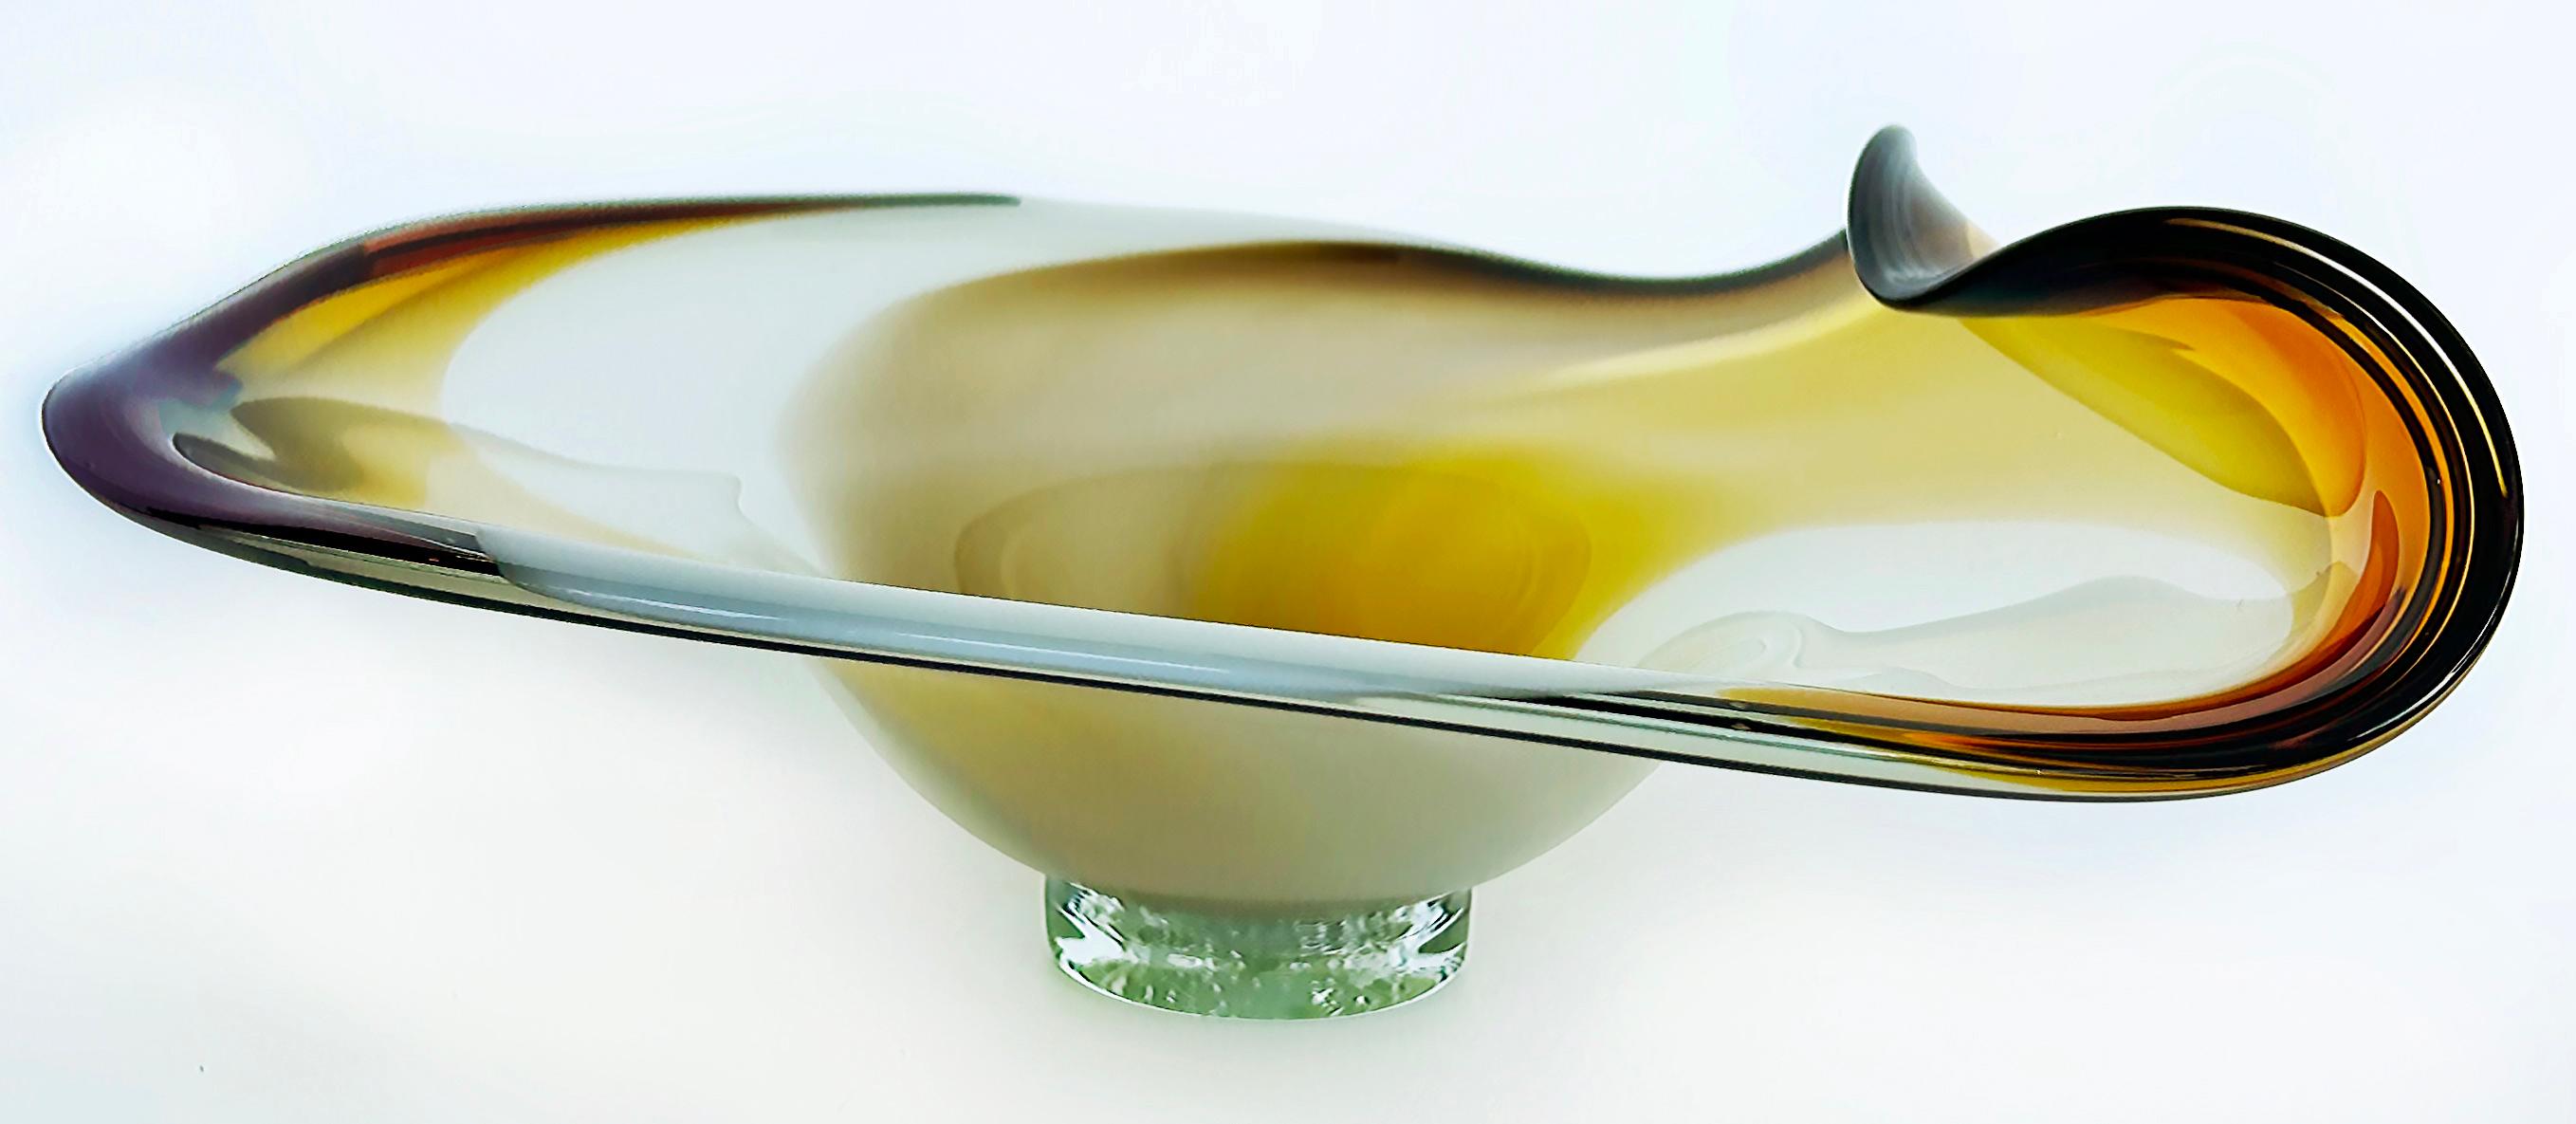 2006 Art Glass Centerpiece Bowl by John Nicholson Signed on Base, “The Wave”  For Sale 2